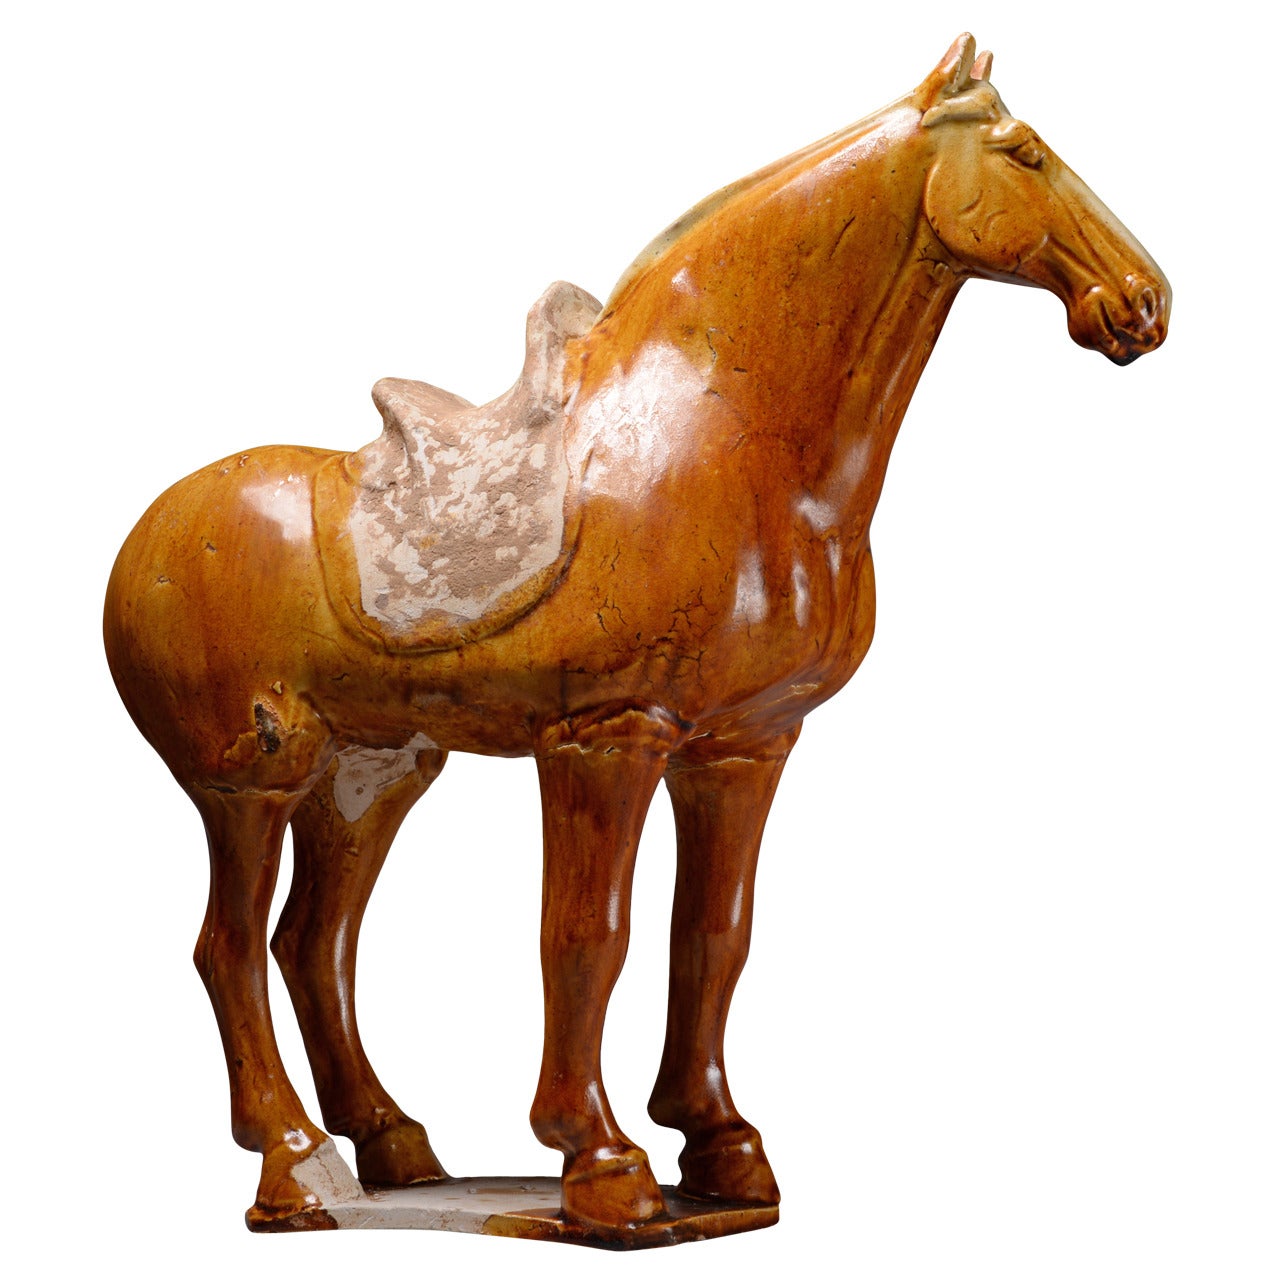 Ancient Chinese Tang Dynasty Pottery Standing Horse, 618 AD